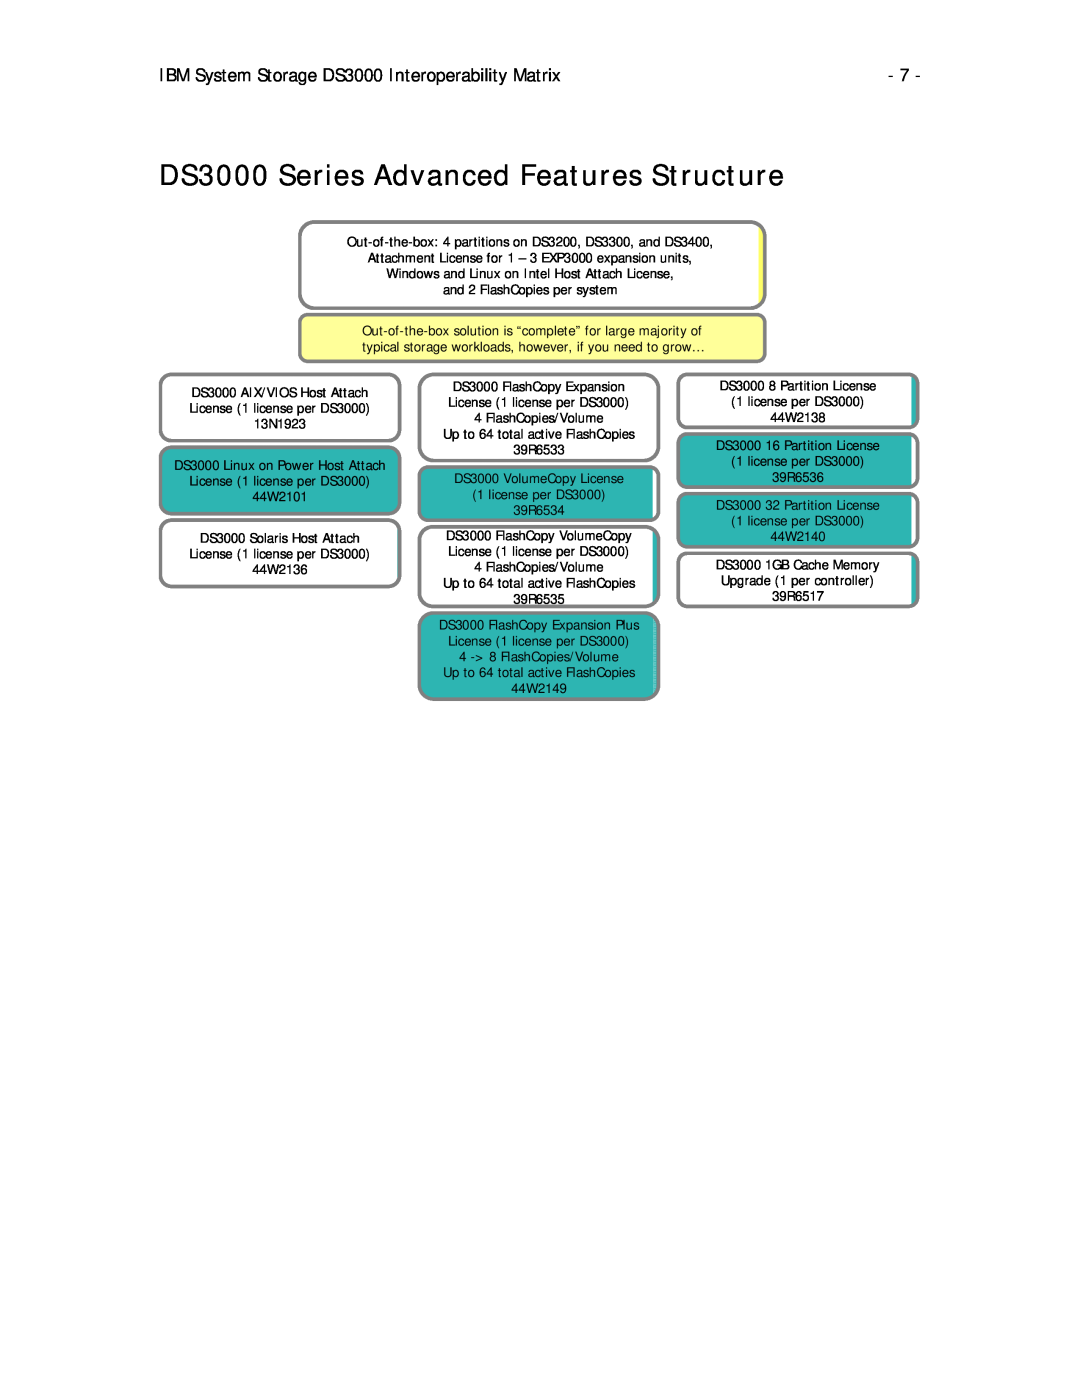 IBM DS3200, DS3300 manual DS3000 Series Advanced Features Structure, IBM System Storage DS3000 Interoperability Matrix 